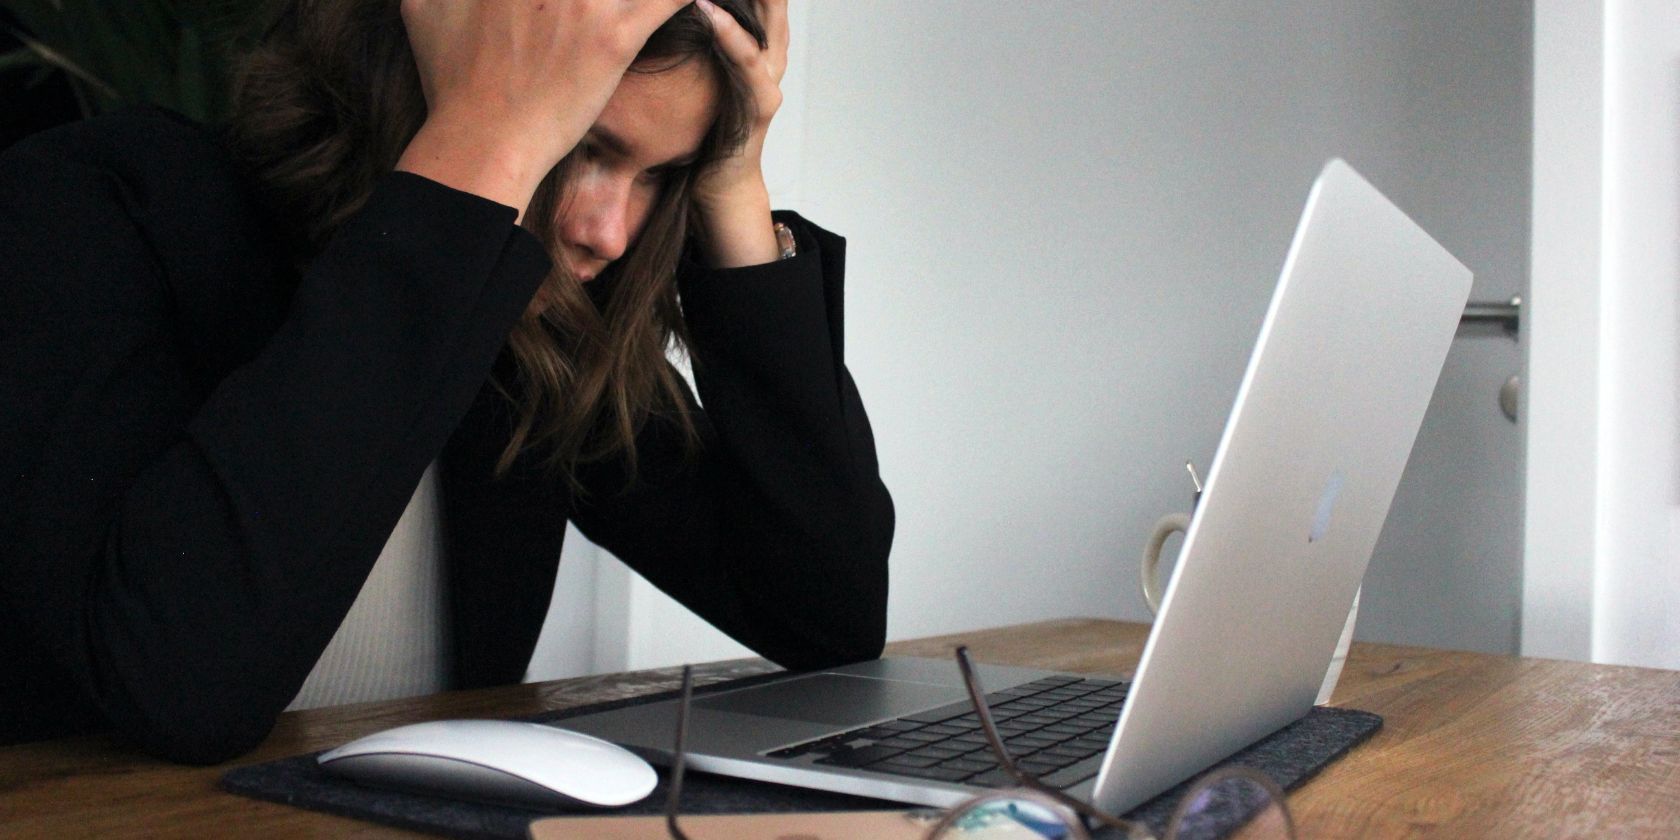 A woman stares at her laptop with her head in her hands, clearly frustrated